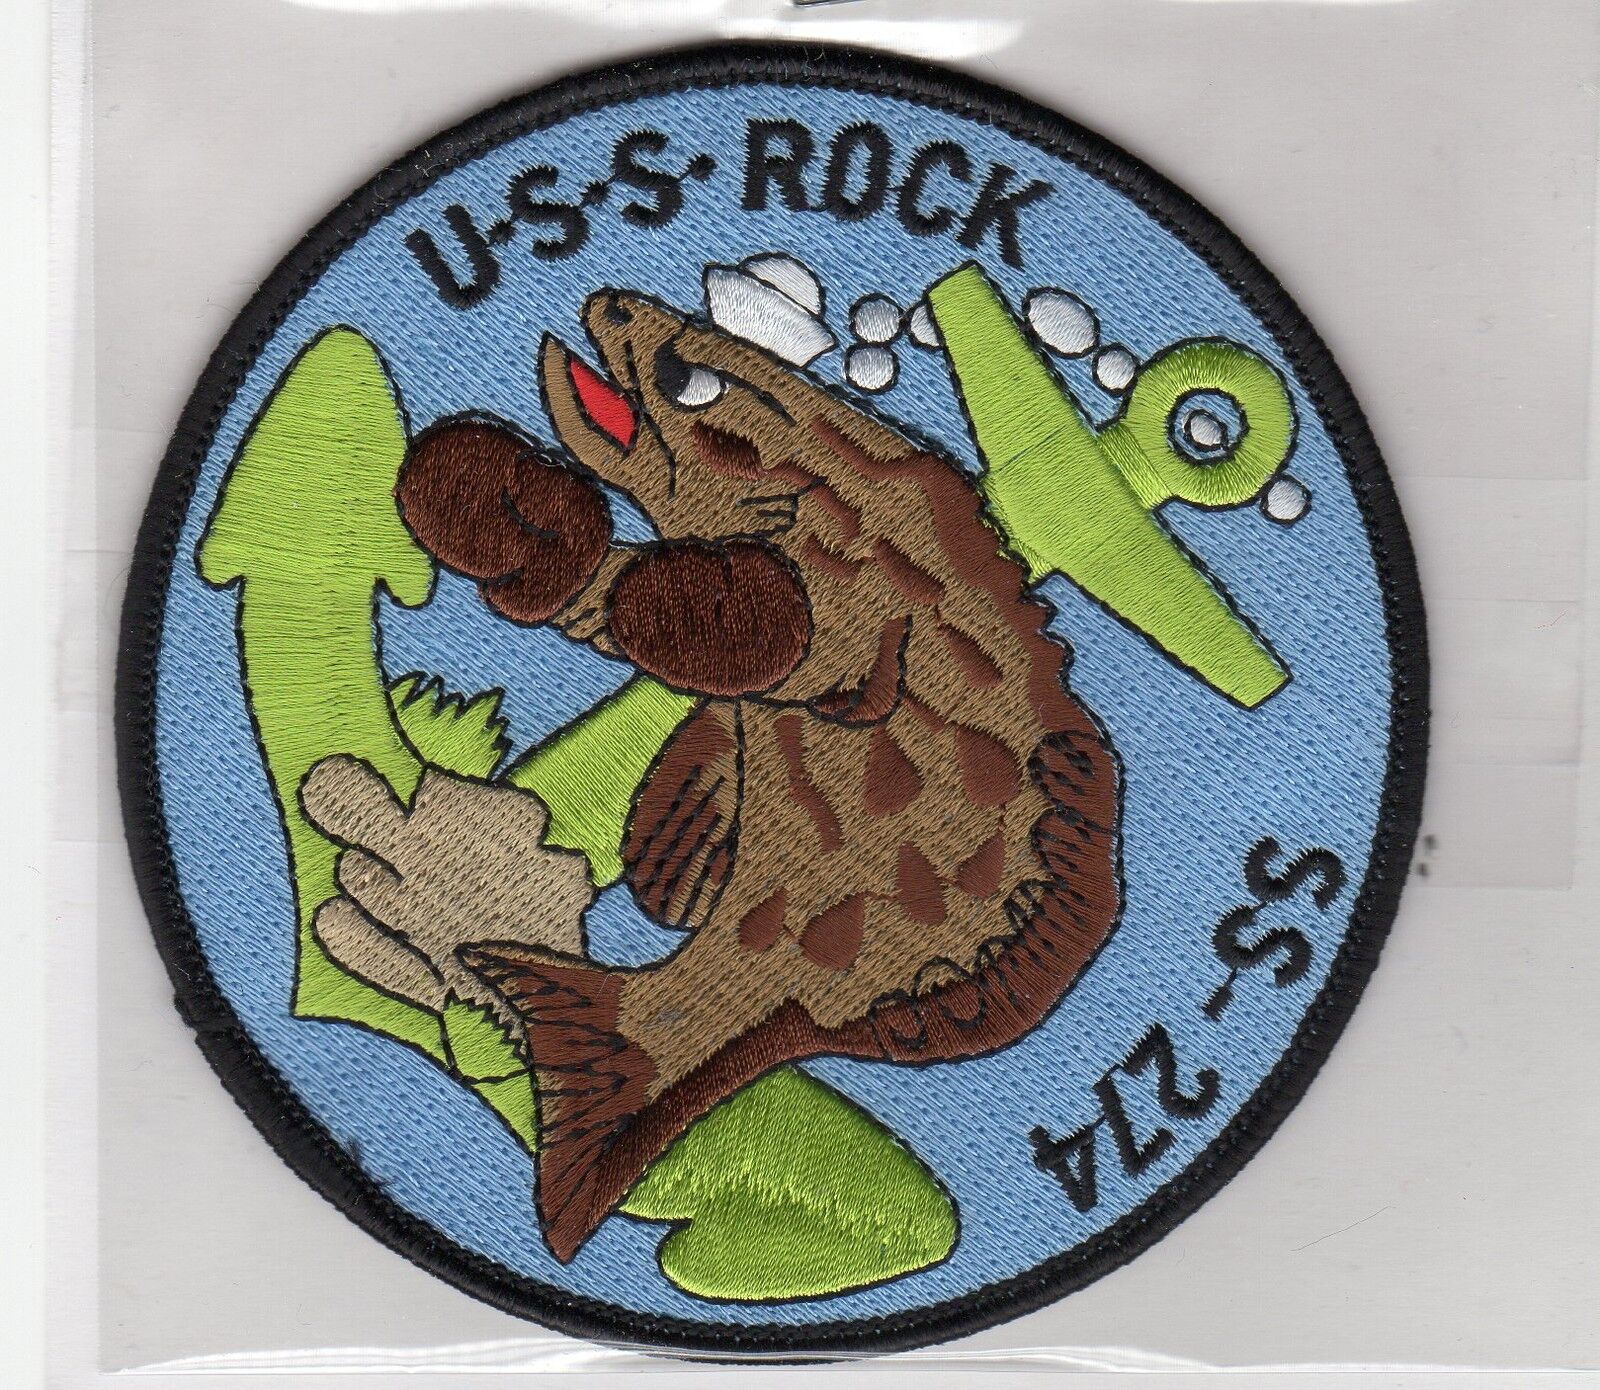 USS Rock SS 274 - Fish w/Boxing Gloves & Anchor BC Patch Cat No B620